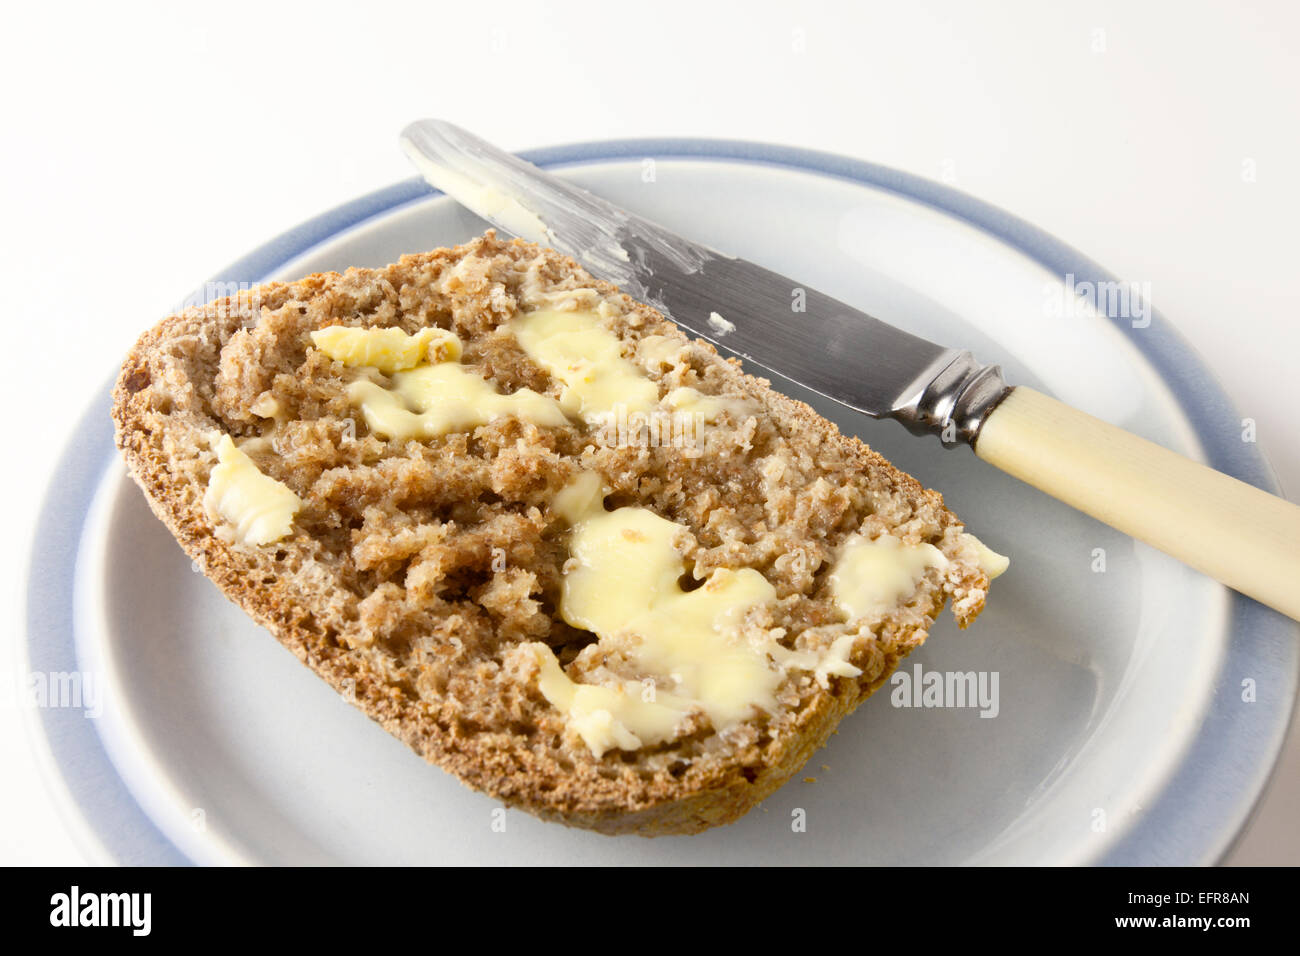 https://c8.alamy.com/comp/EFR8AN/slice-of-freshly-baked-warm-wholemeal-bread-with-butter-on-a-plate-EFR8AN.jpg